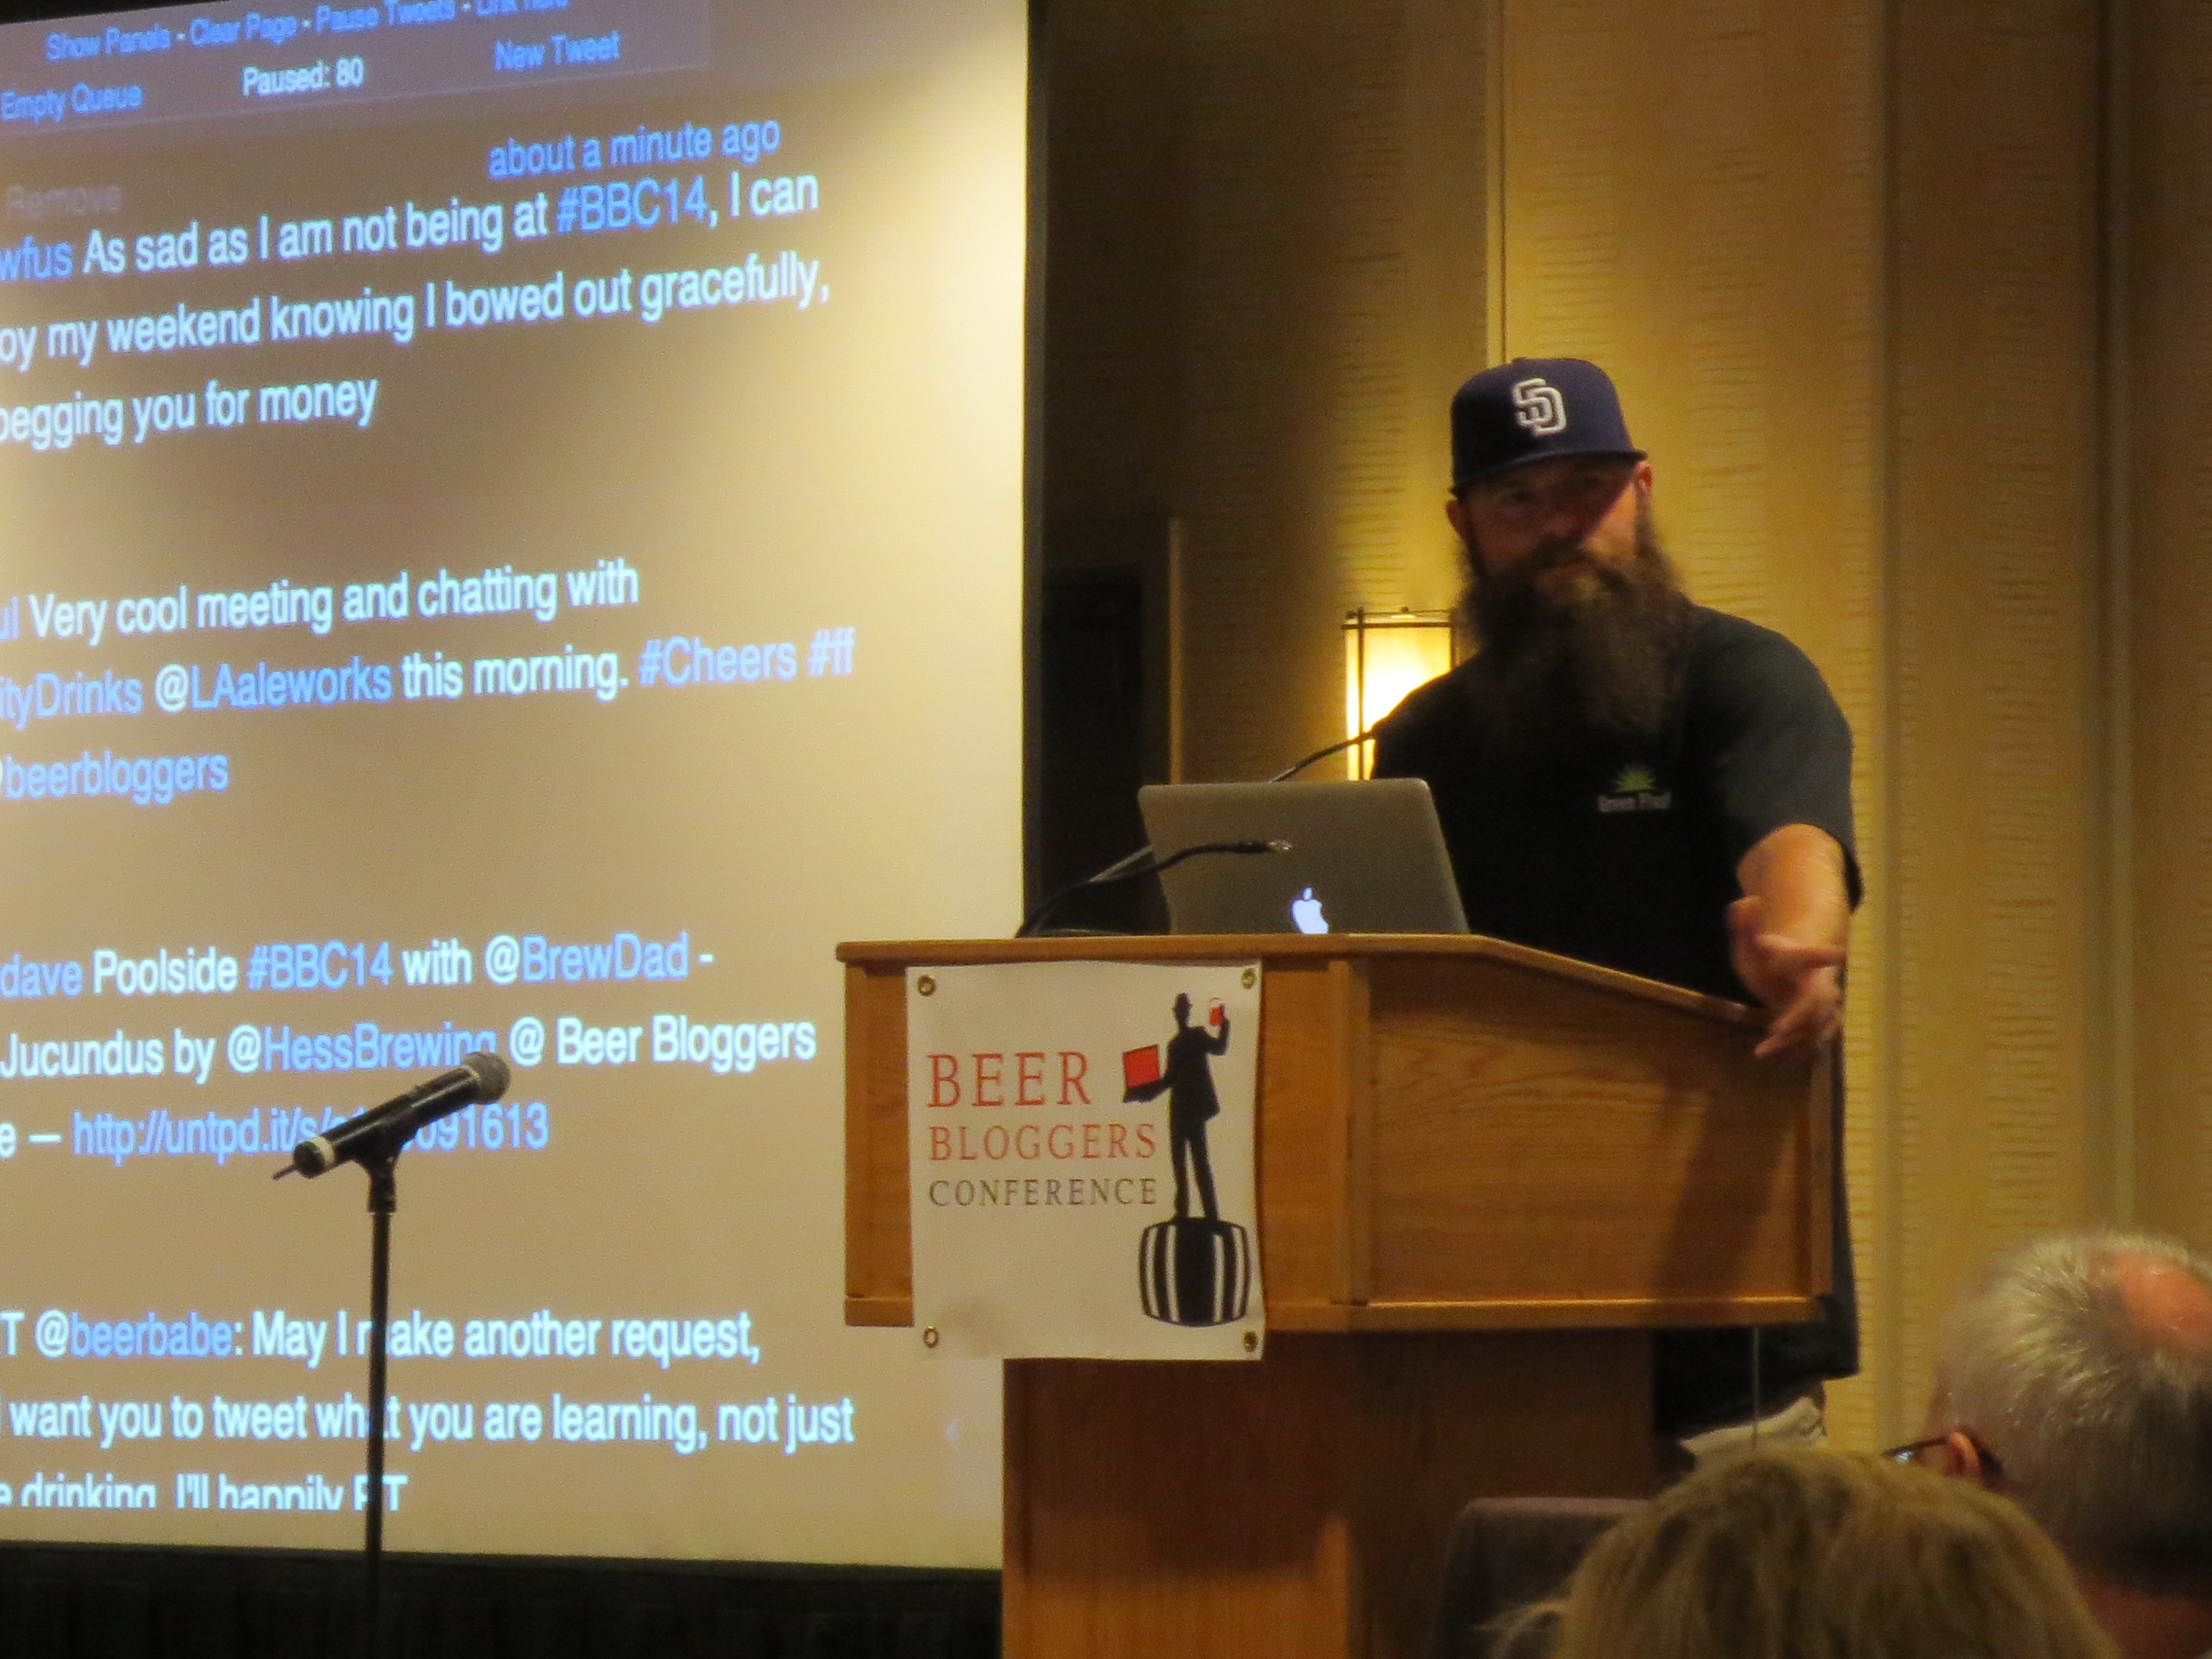 Top 5 Things I Learned on Day 1 of Beer Bloggers Conference - #BBC14 @beerbloggers